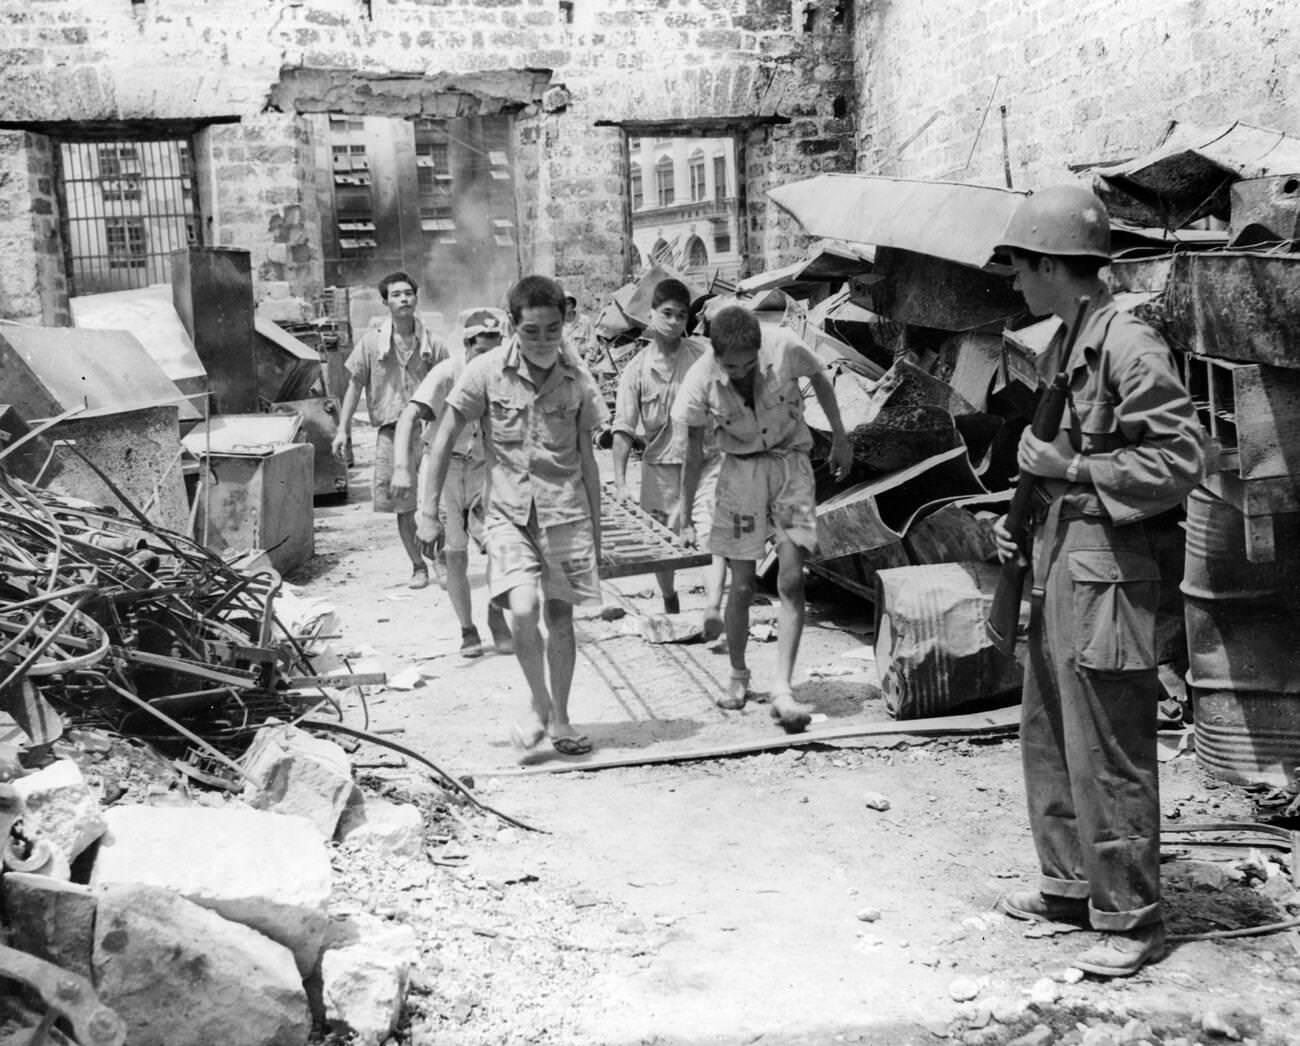 Japanese prisoners of war are supervised by American military personnel, assisting in Manila's cleanup after the battle, 1945.